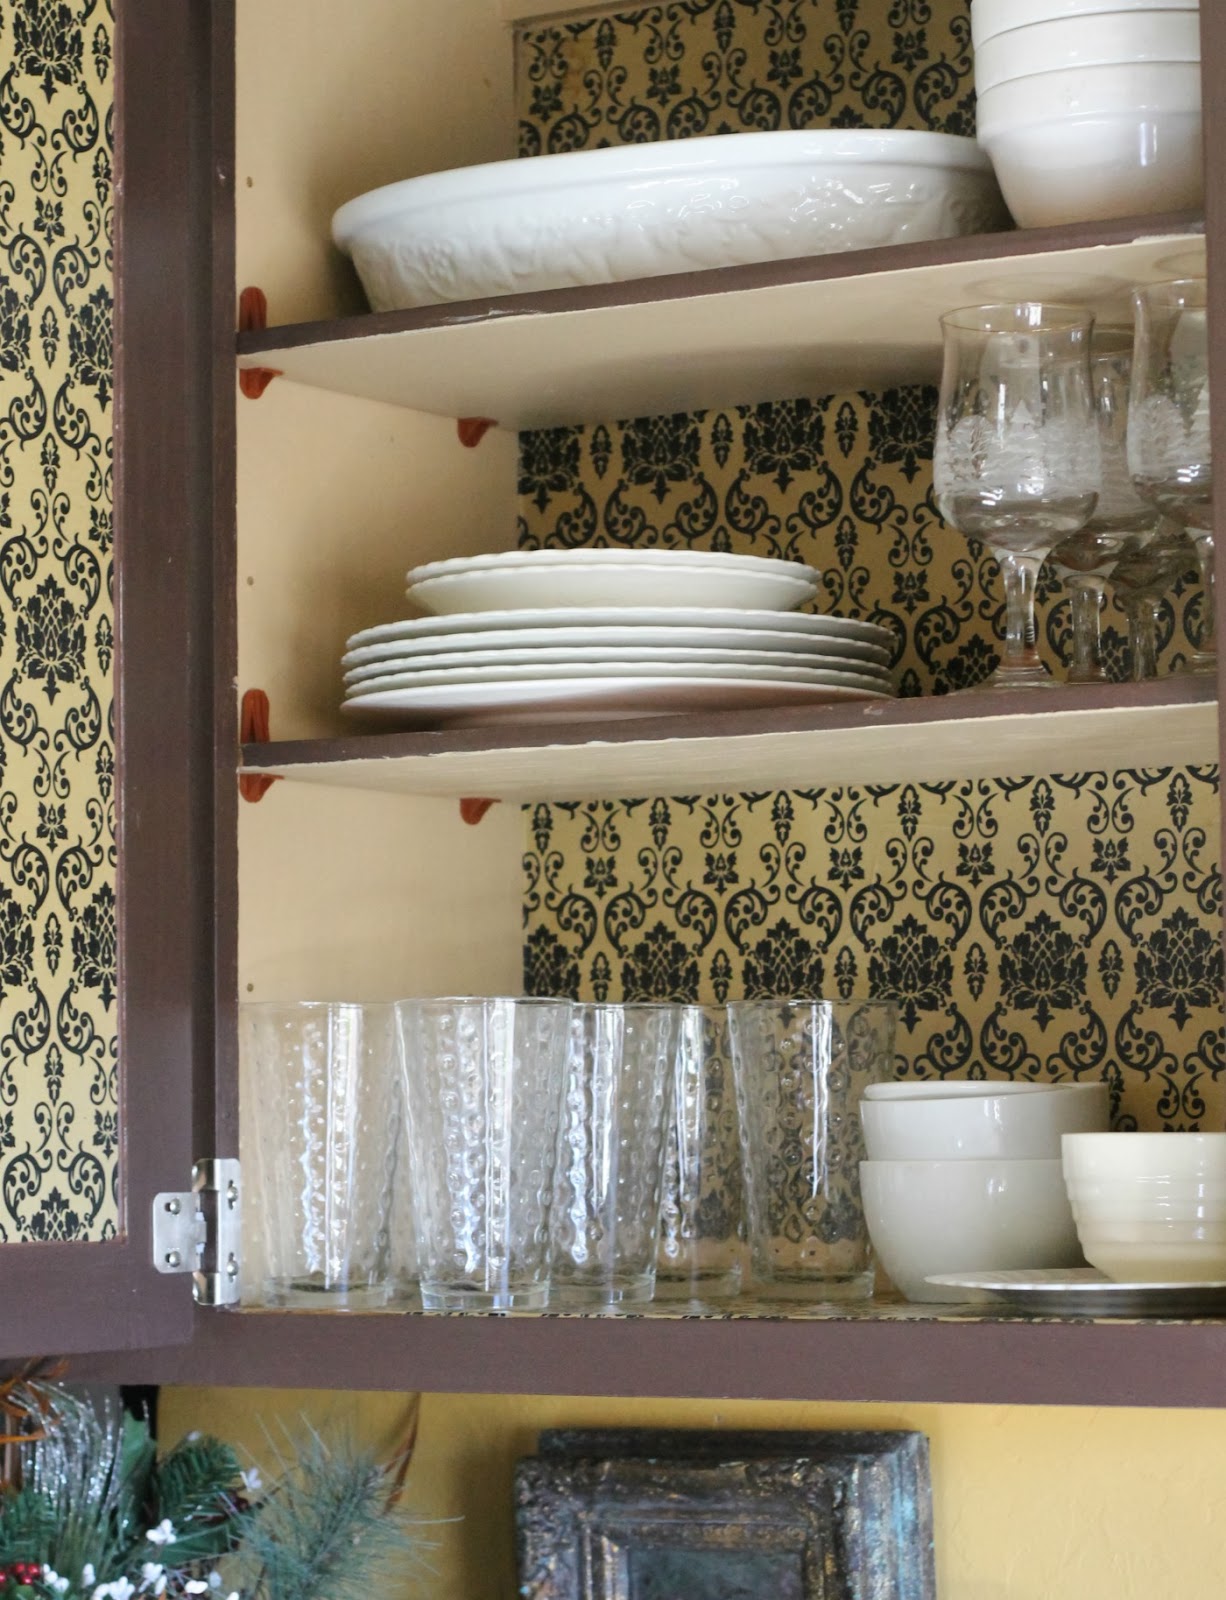 Where Your Treasure Is: Inside the Kitchen Cabinet